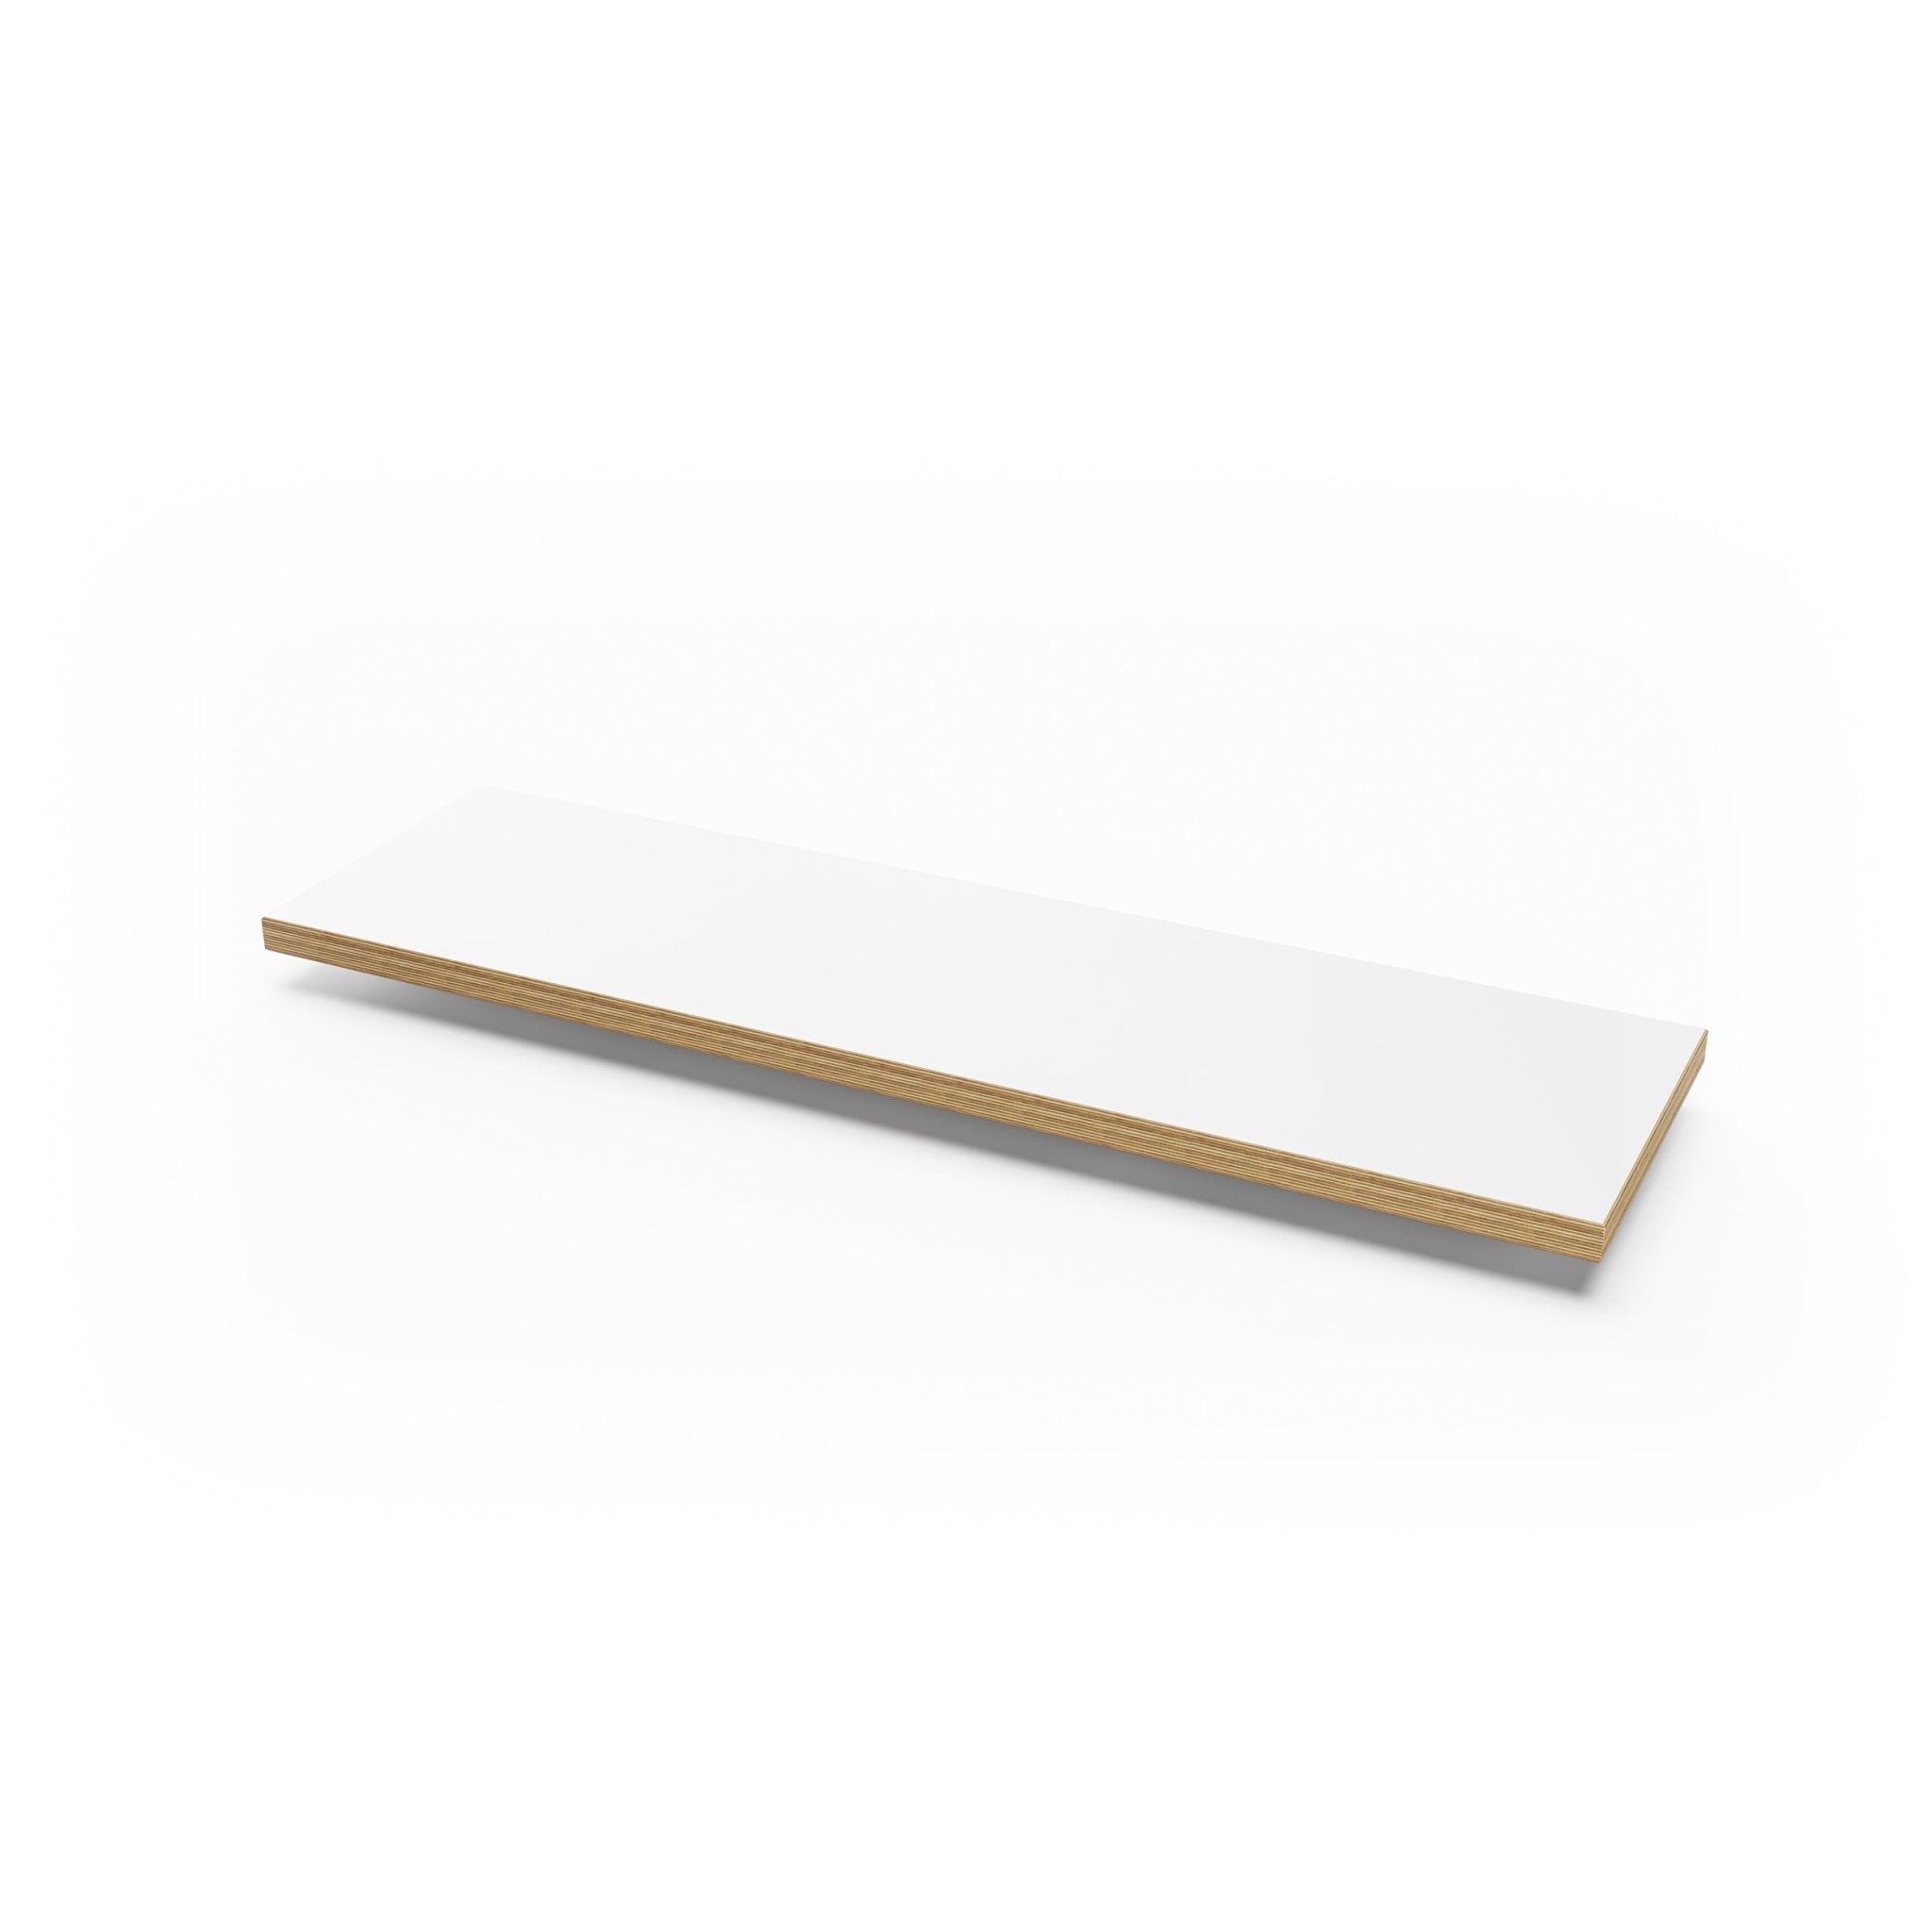 Formica Plywood Bench Top-White-Bench (34cm x 120cm x 3.2cm)-The Hairpin Leg Co.